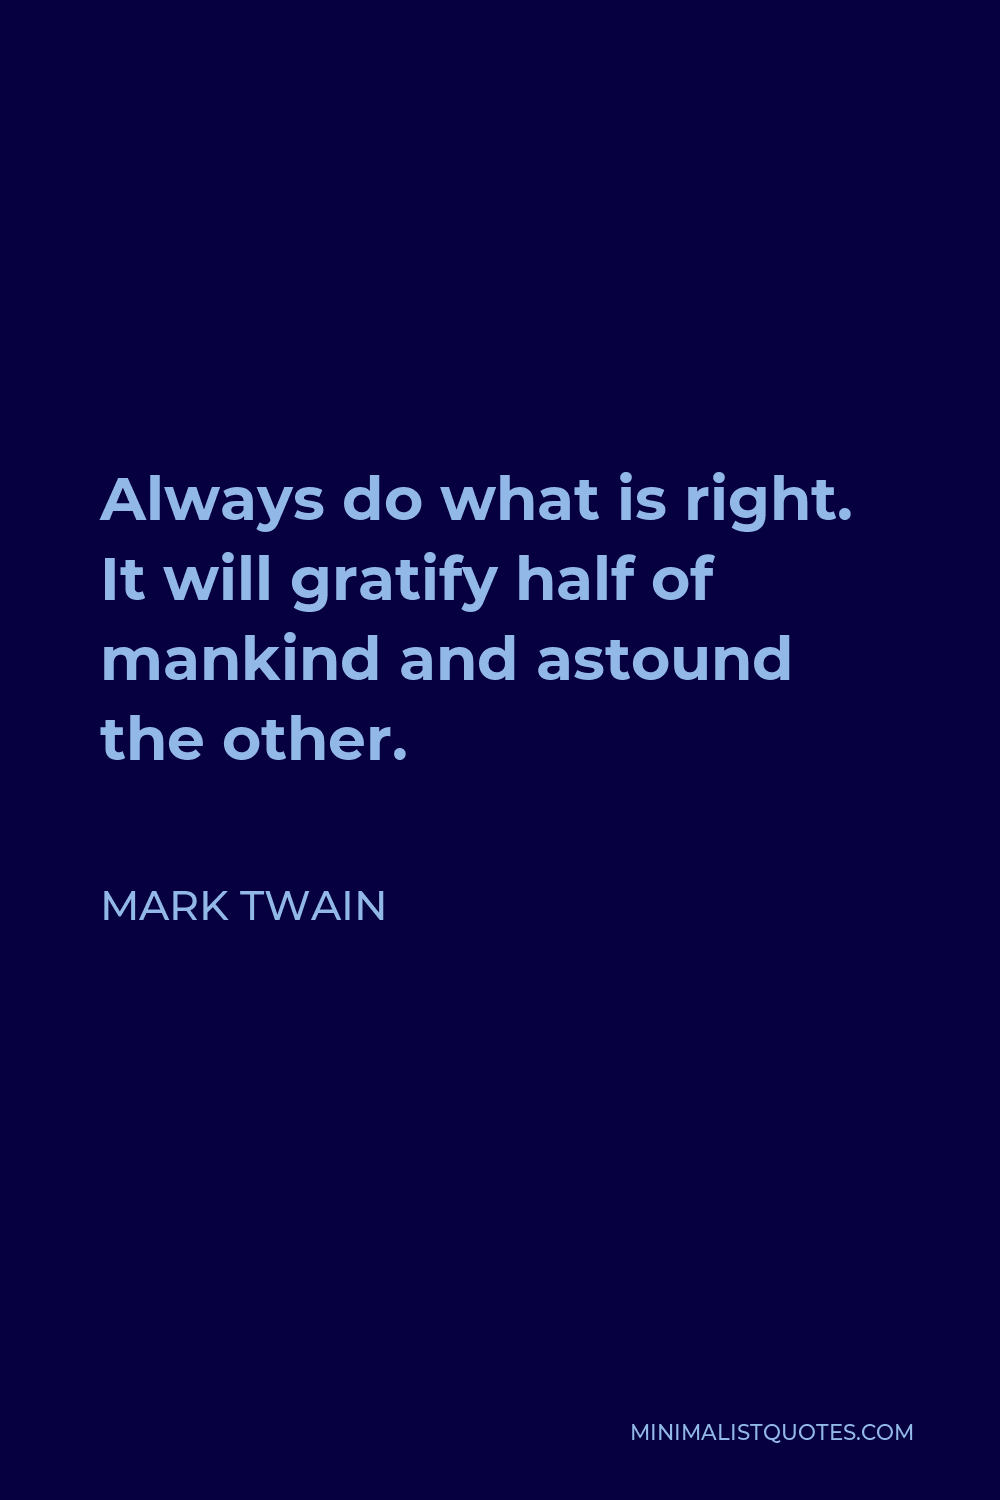 Mark Twain Quote - Always do what is right. It will gratify half of mankind and astound the other.